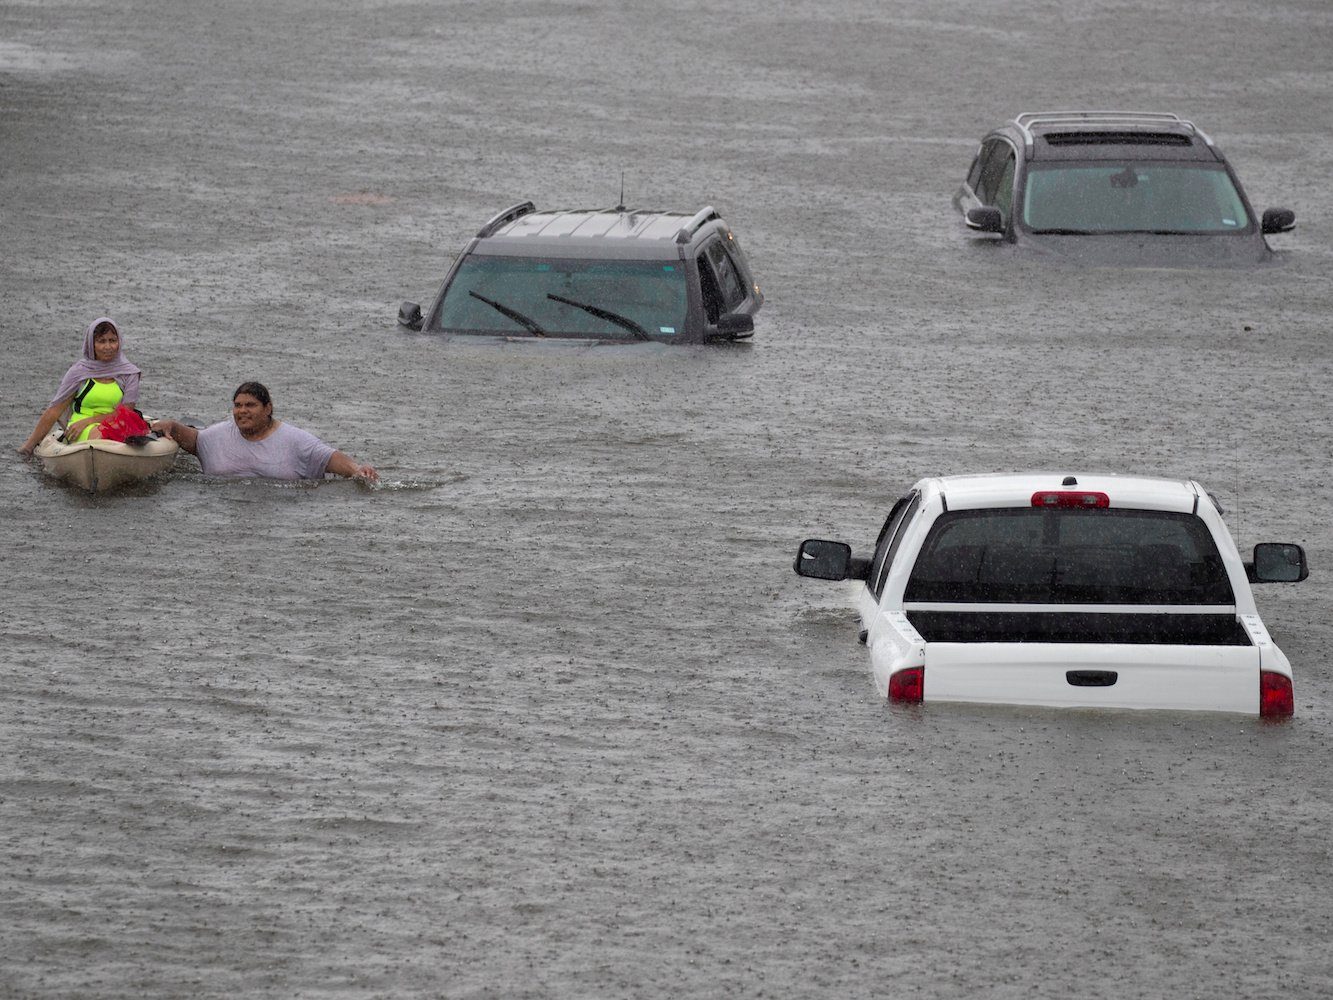 A resident of Houston  (right) rescues a stranded woman (left) from a flooded area.